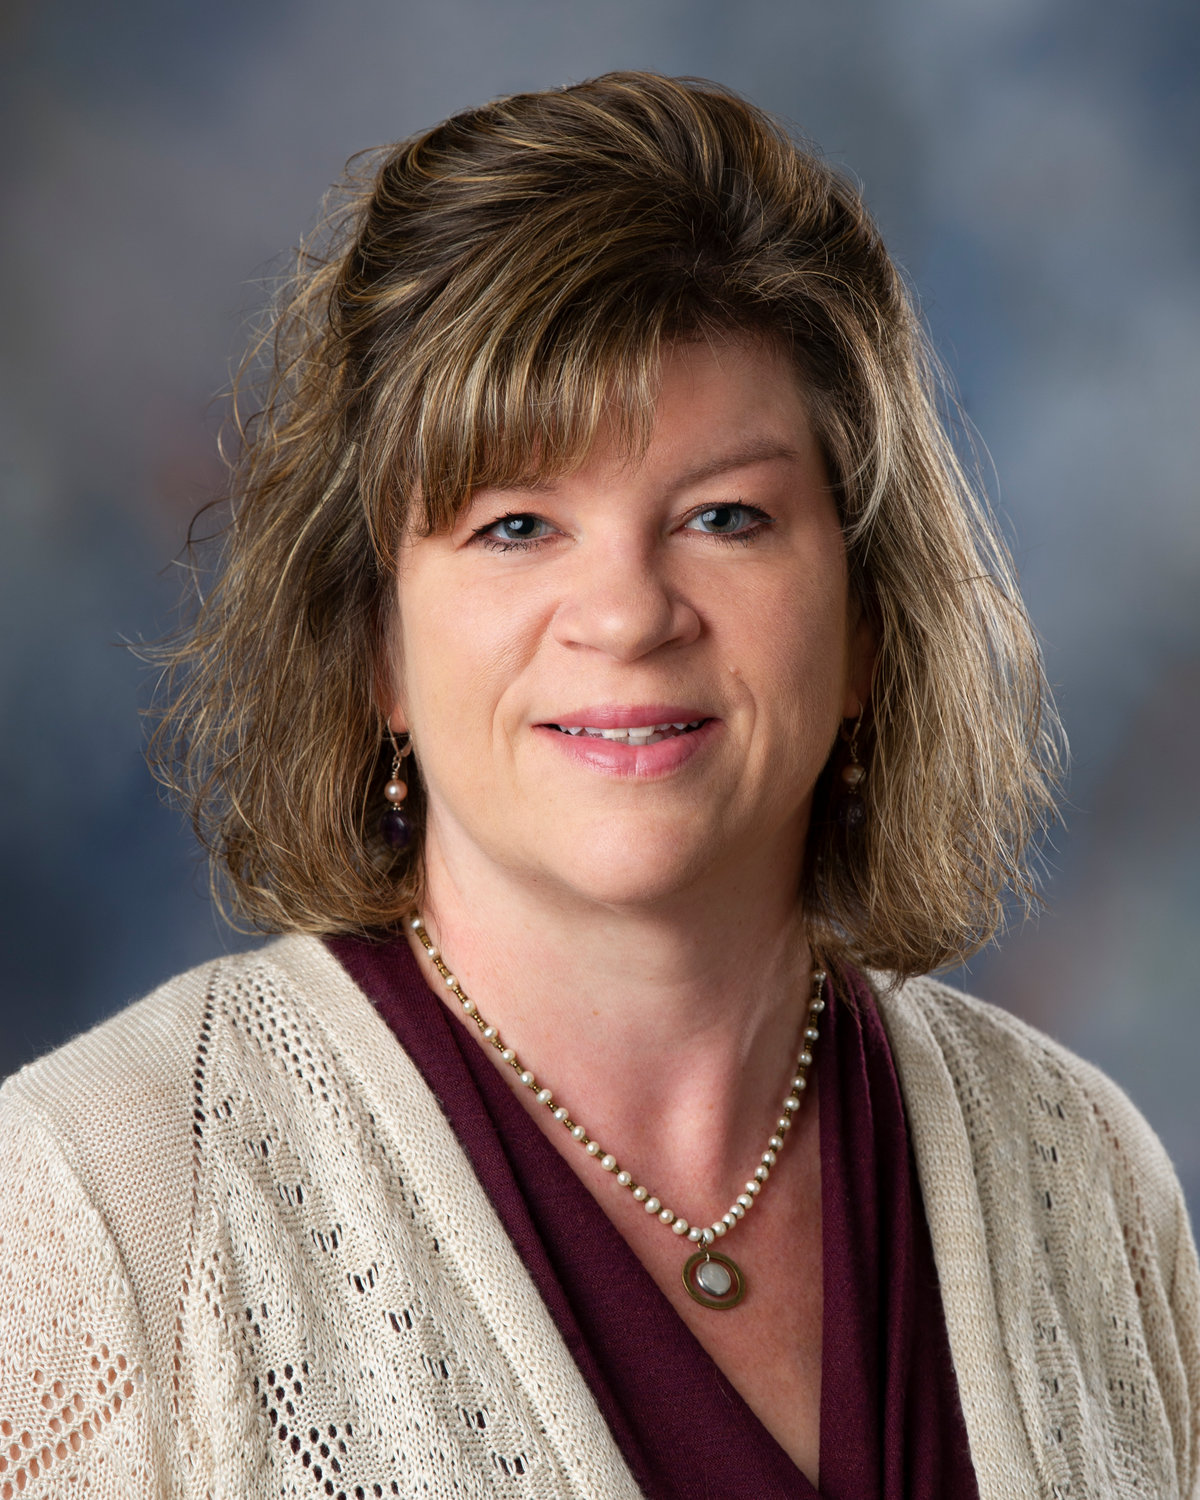 Chandra Roberts is the new director of patient care services at Wayne Memorial Hospital.